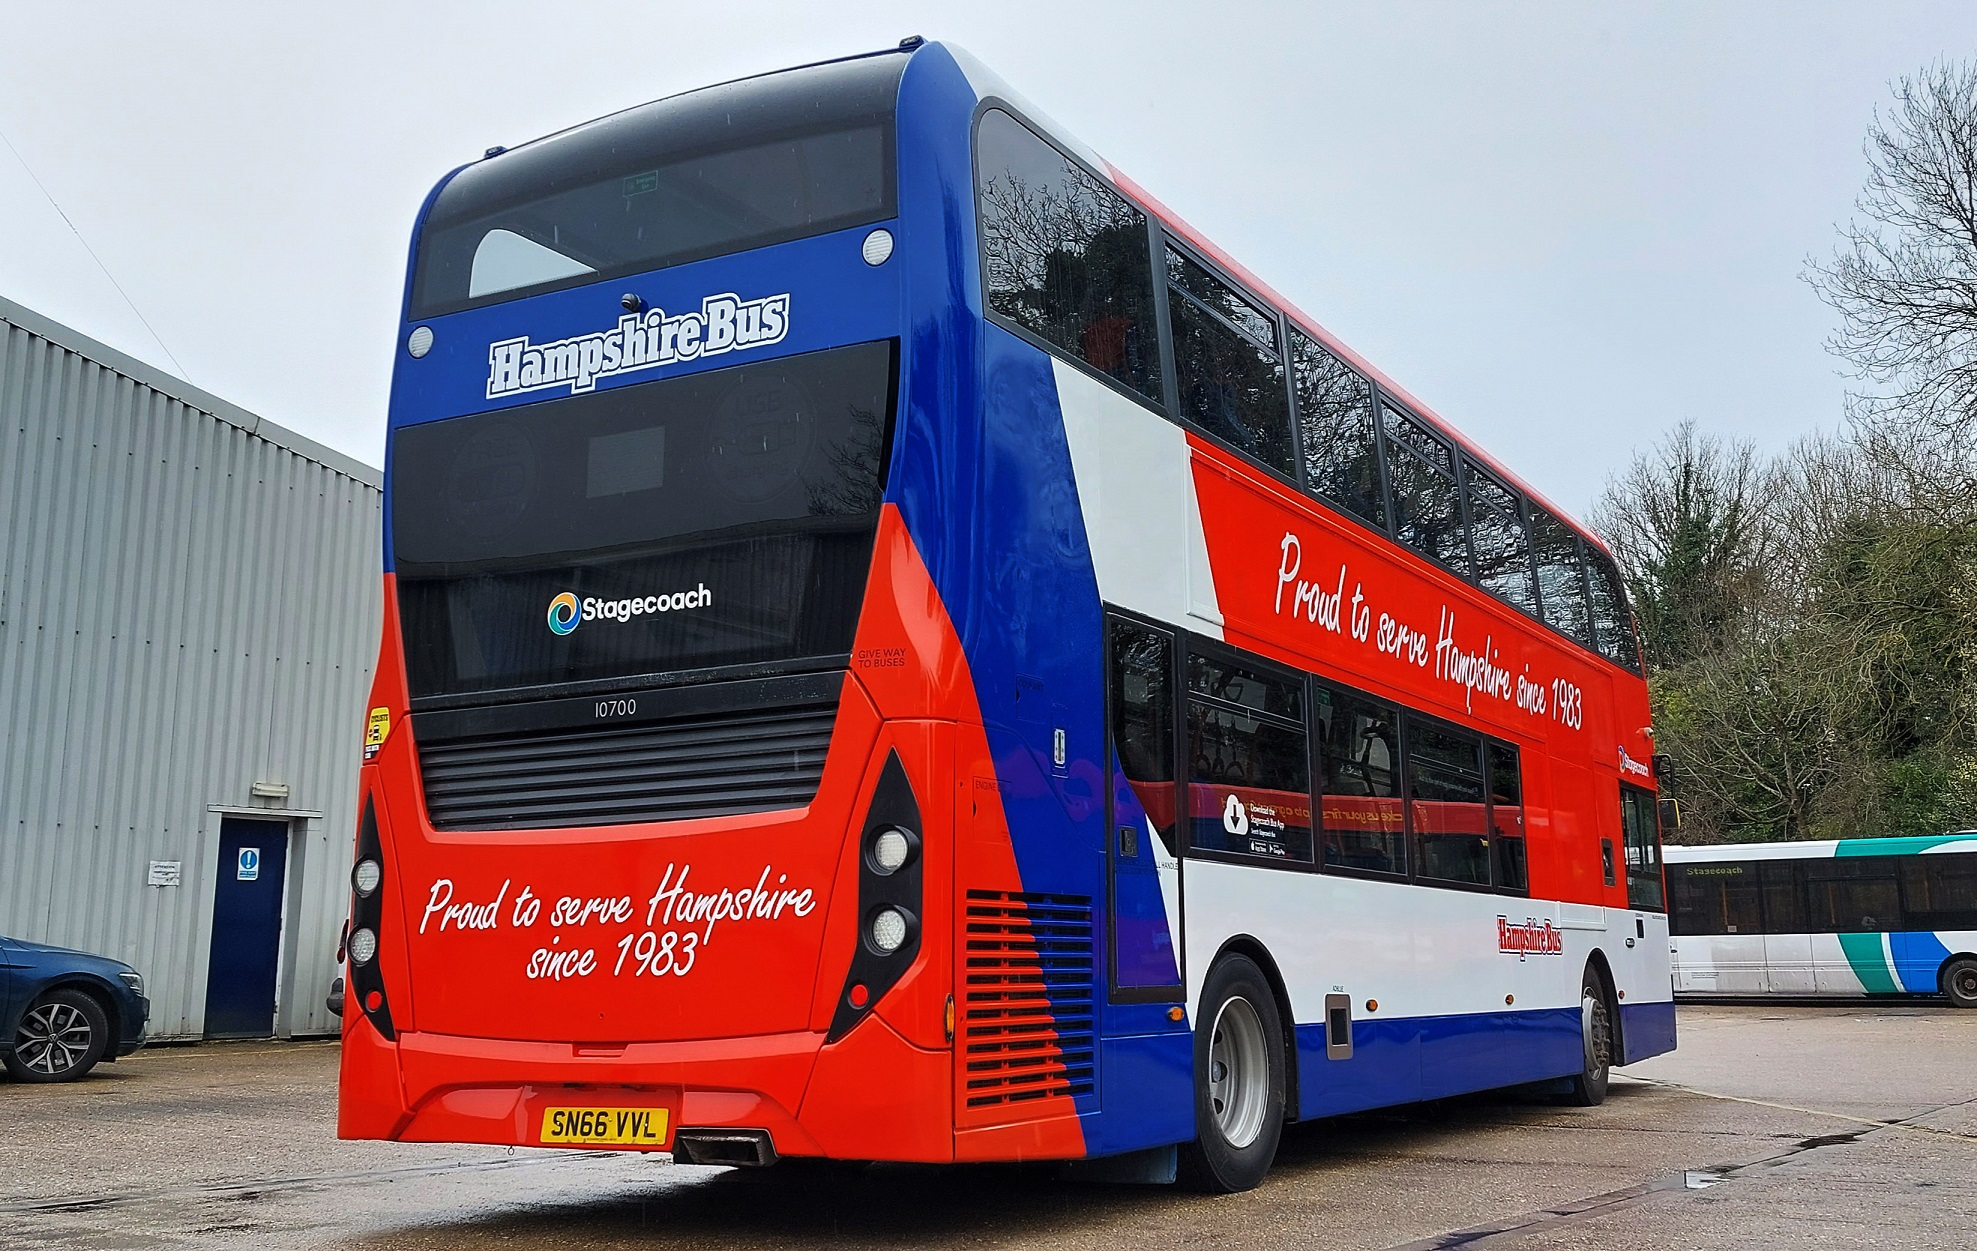 Stagecoach South Enviro400 in Hampshire Bus livery